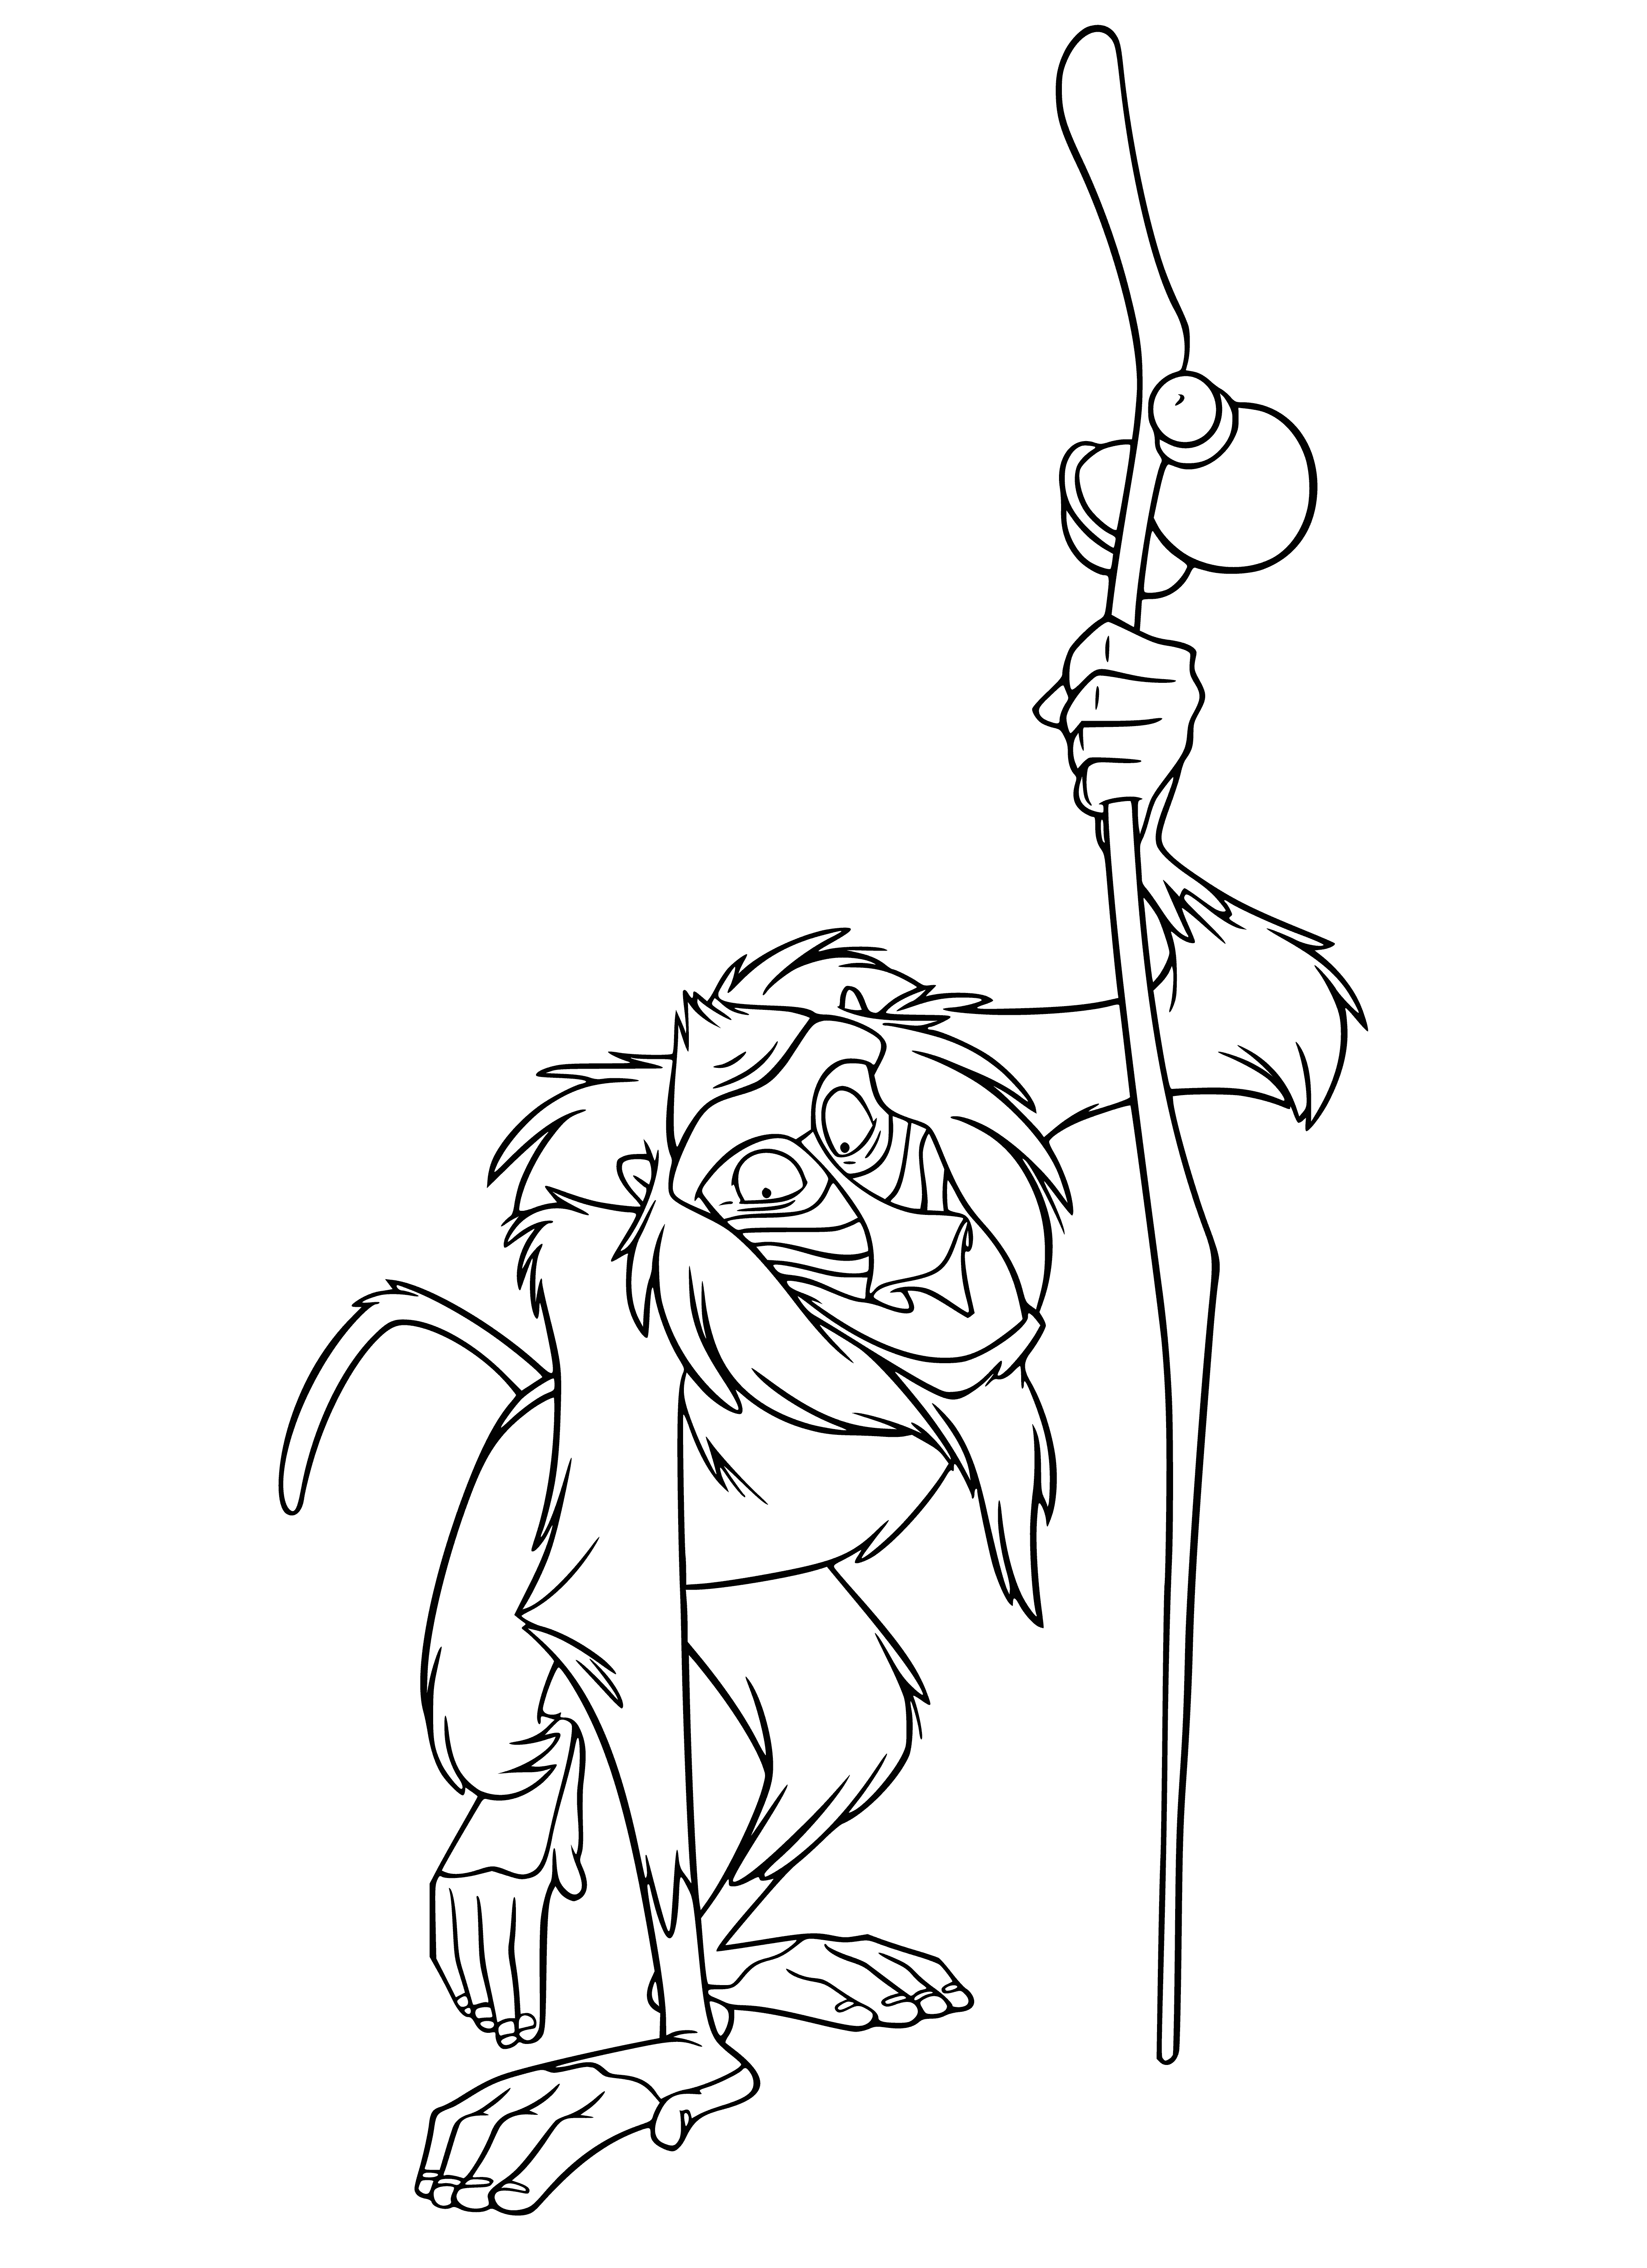 coloring page: Old baboon in red/yellow robe w/ long gray beard & stick sits on rock. Next to him is a small lion cub. #Animals #Africa #Safari